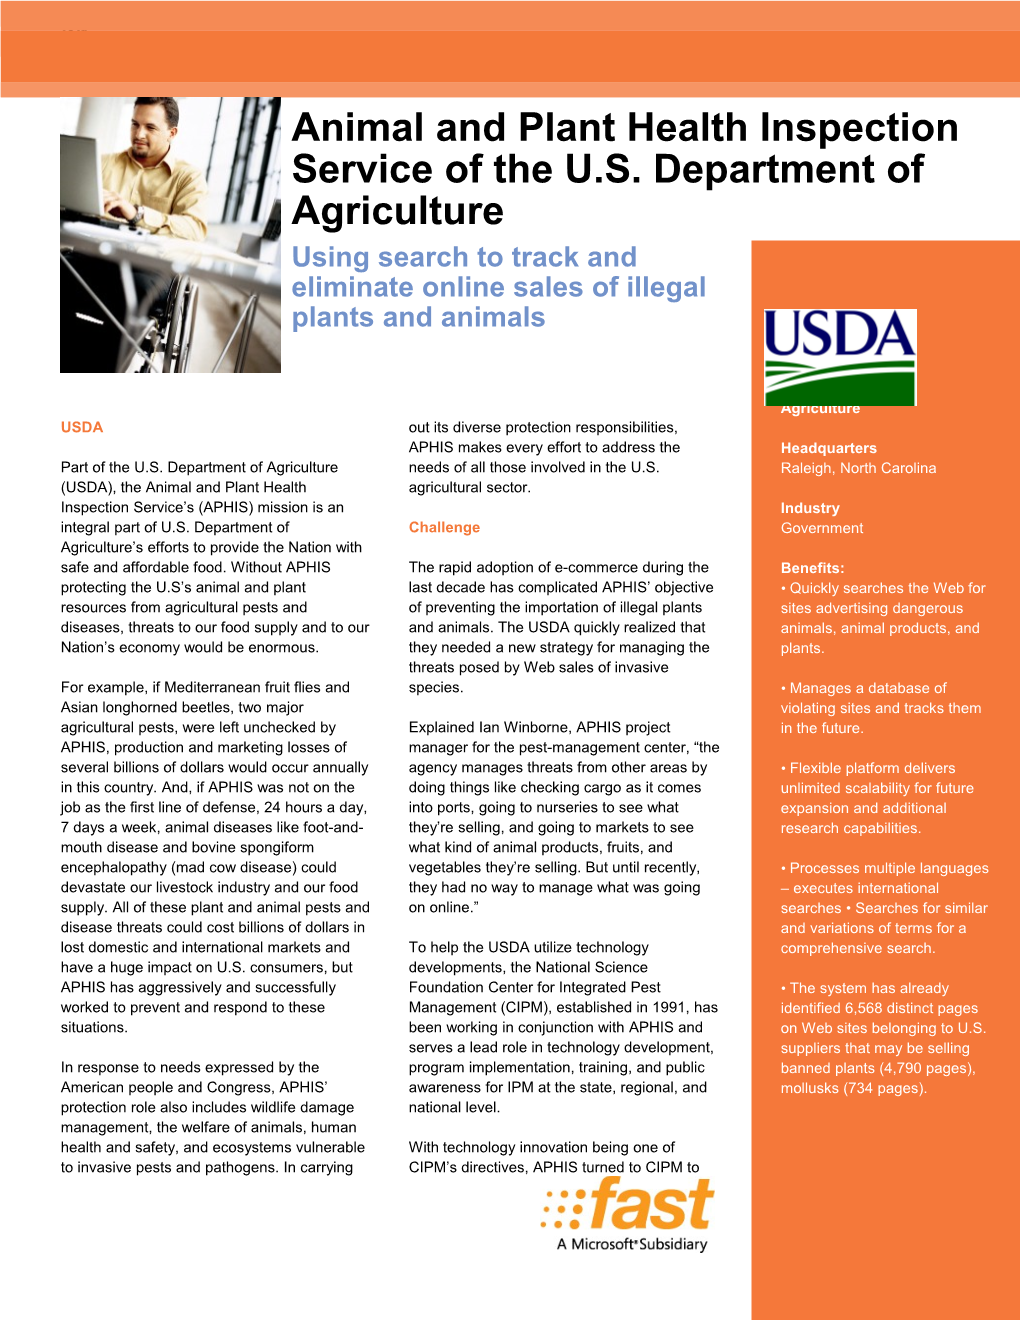 Part of the U.S. Department of Agriculture (USDA), the Animal and Plant Health Inspection